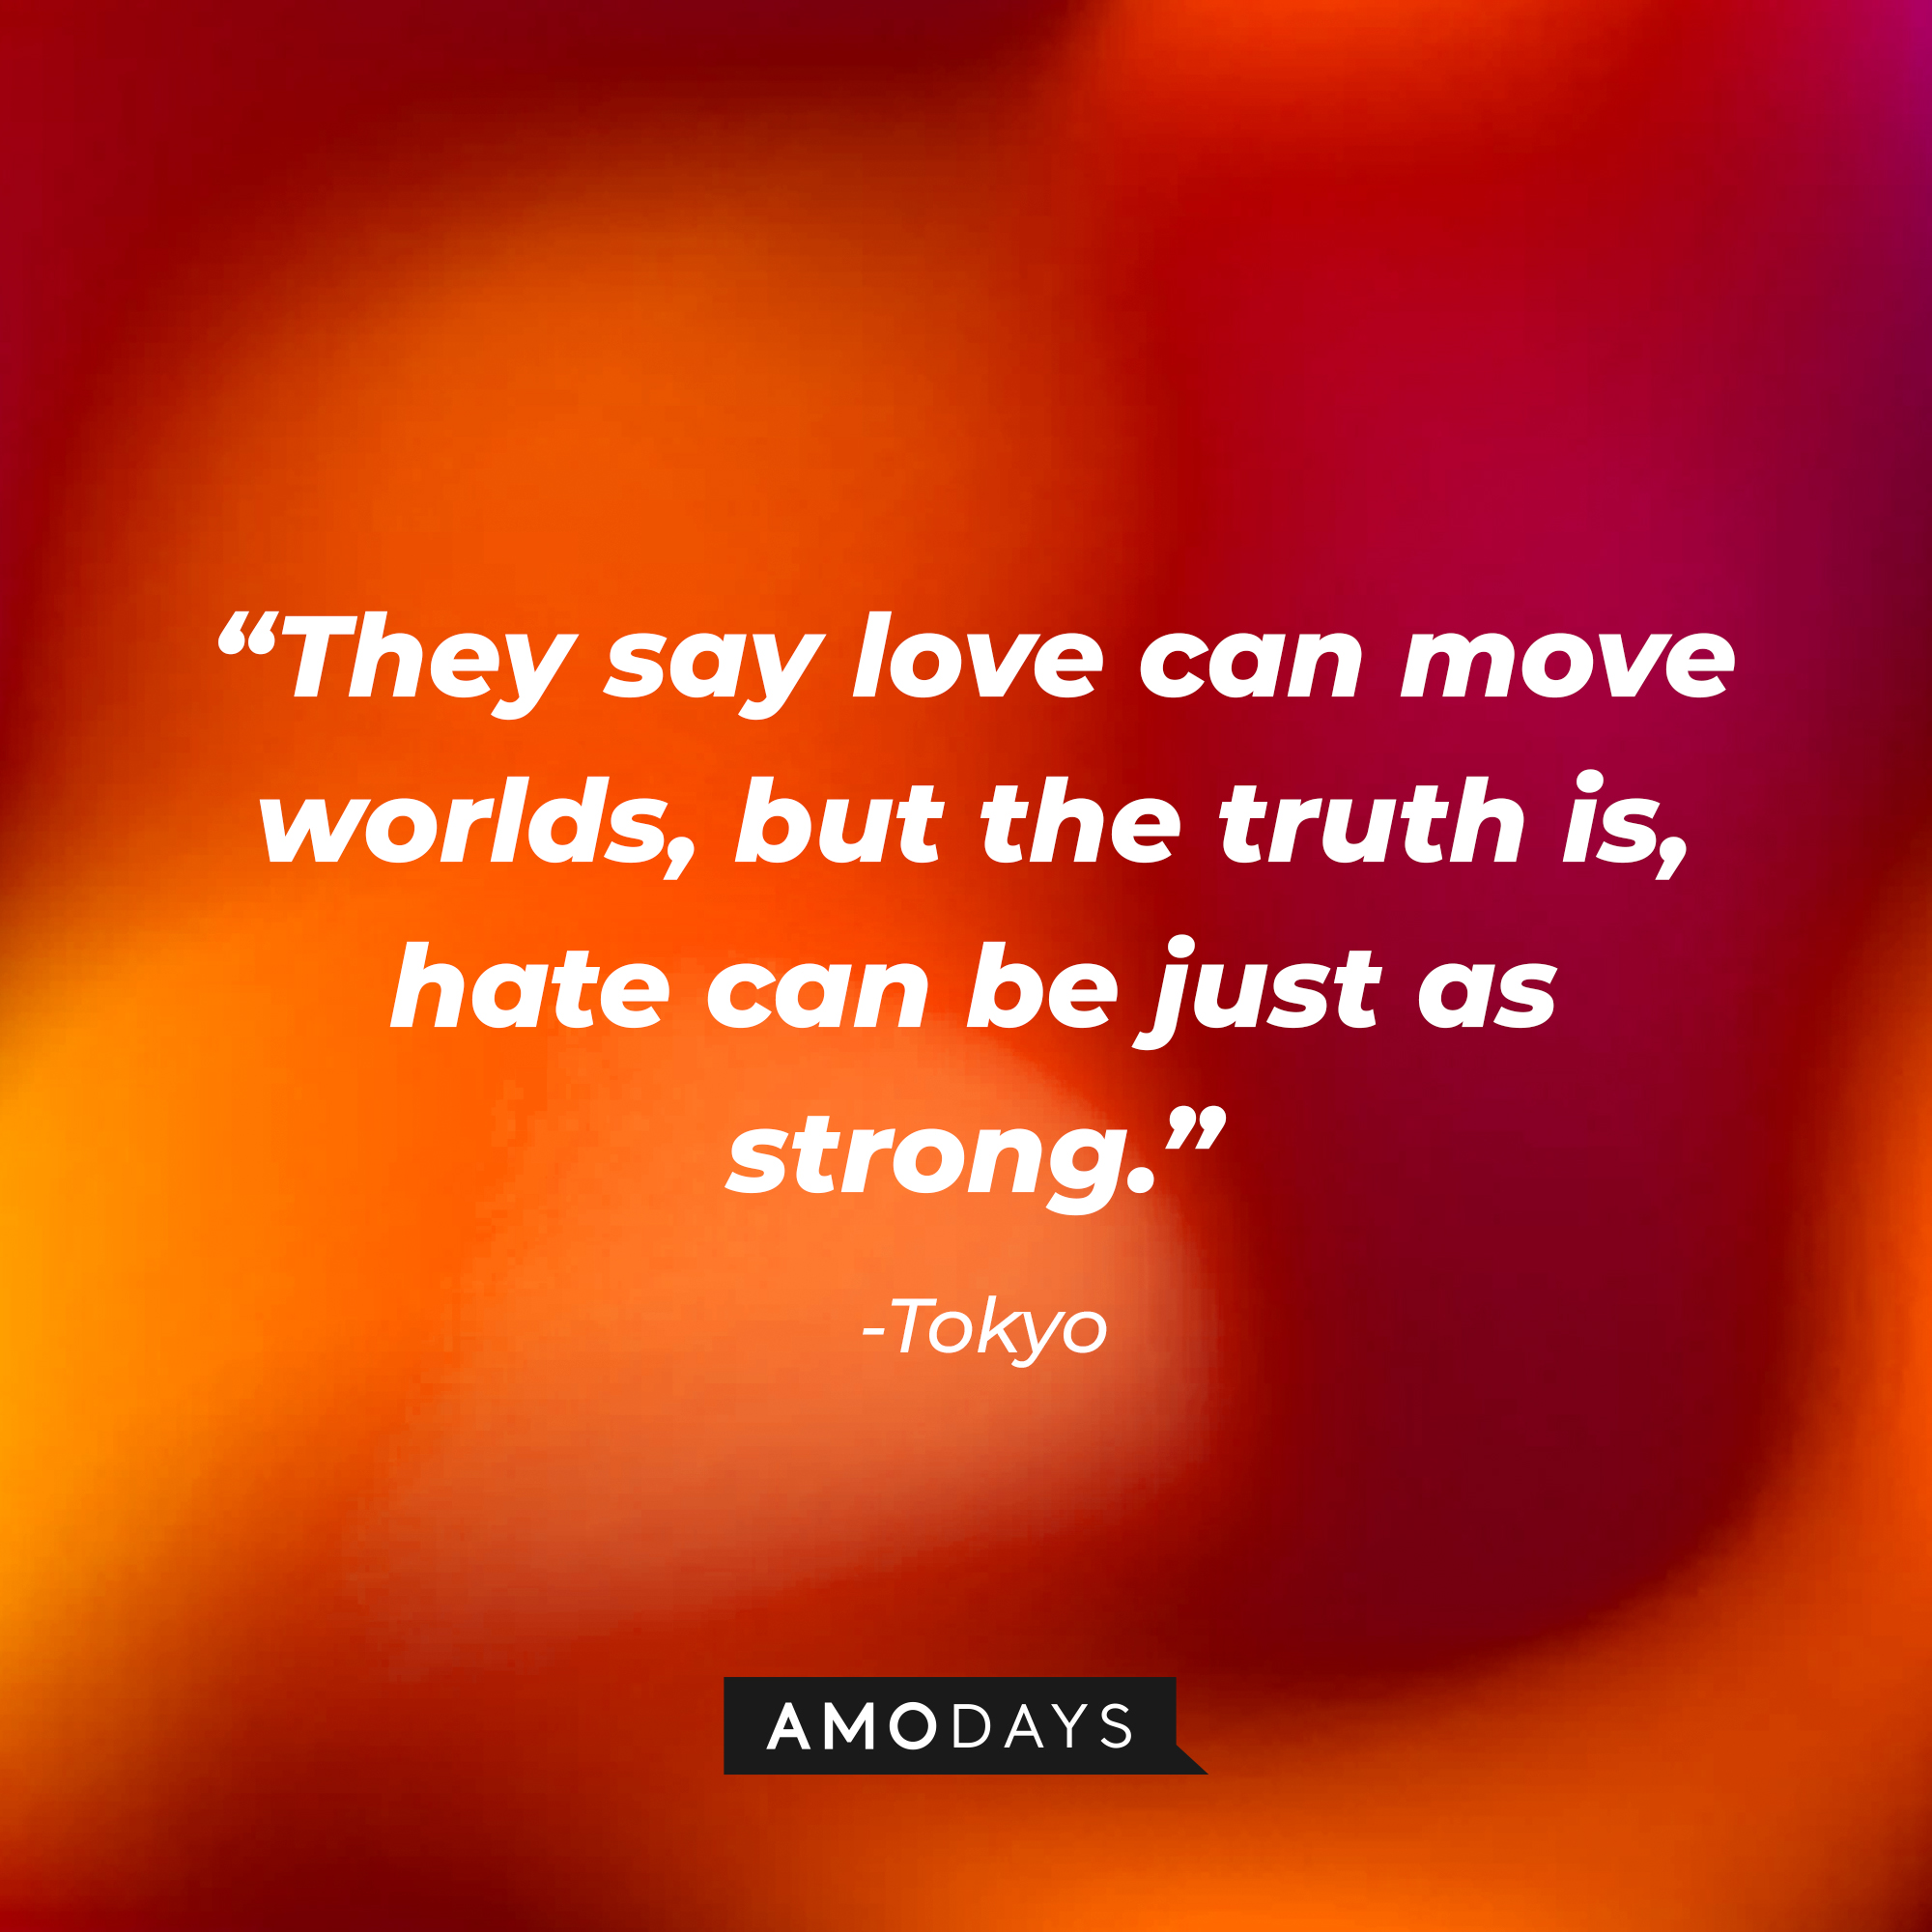 Tokyo’s  quote: “They say love can move worlds, but the truth is, hate can be just as strong.” | Source: AmoDays